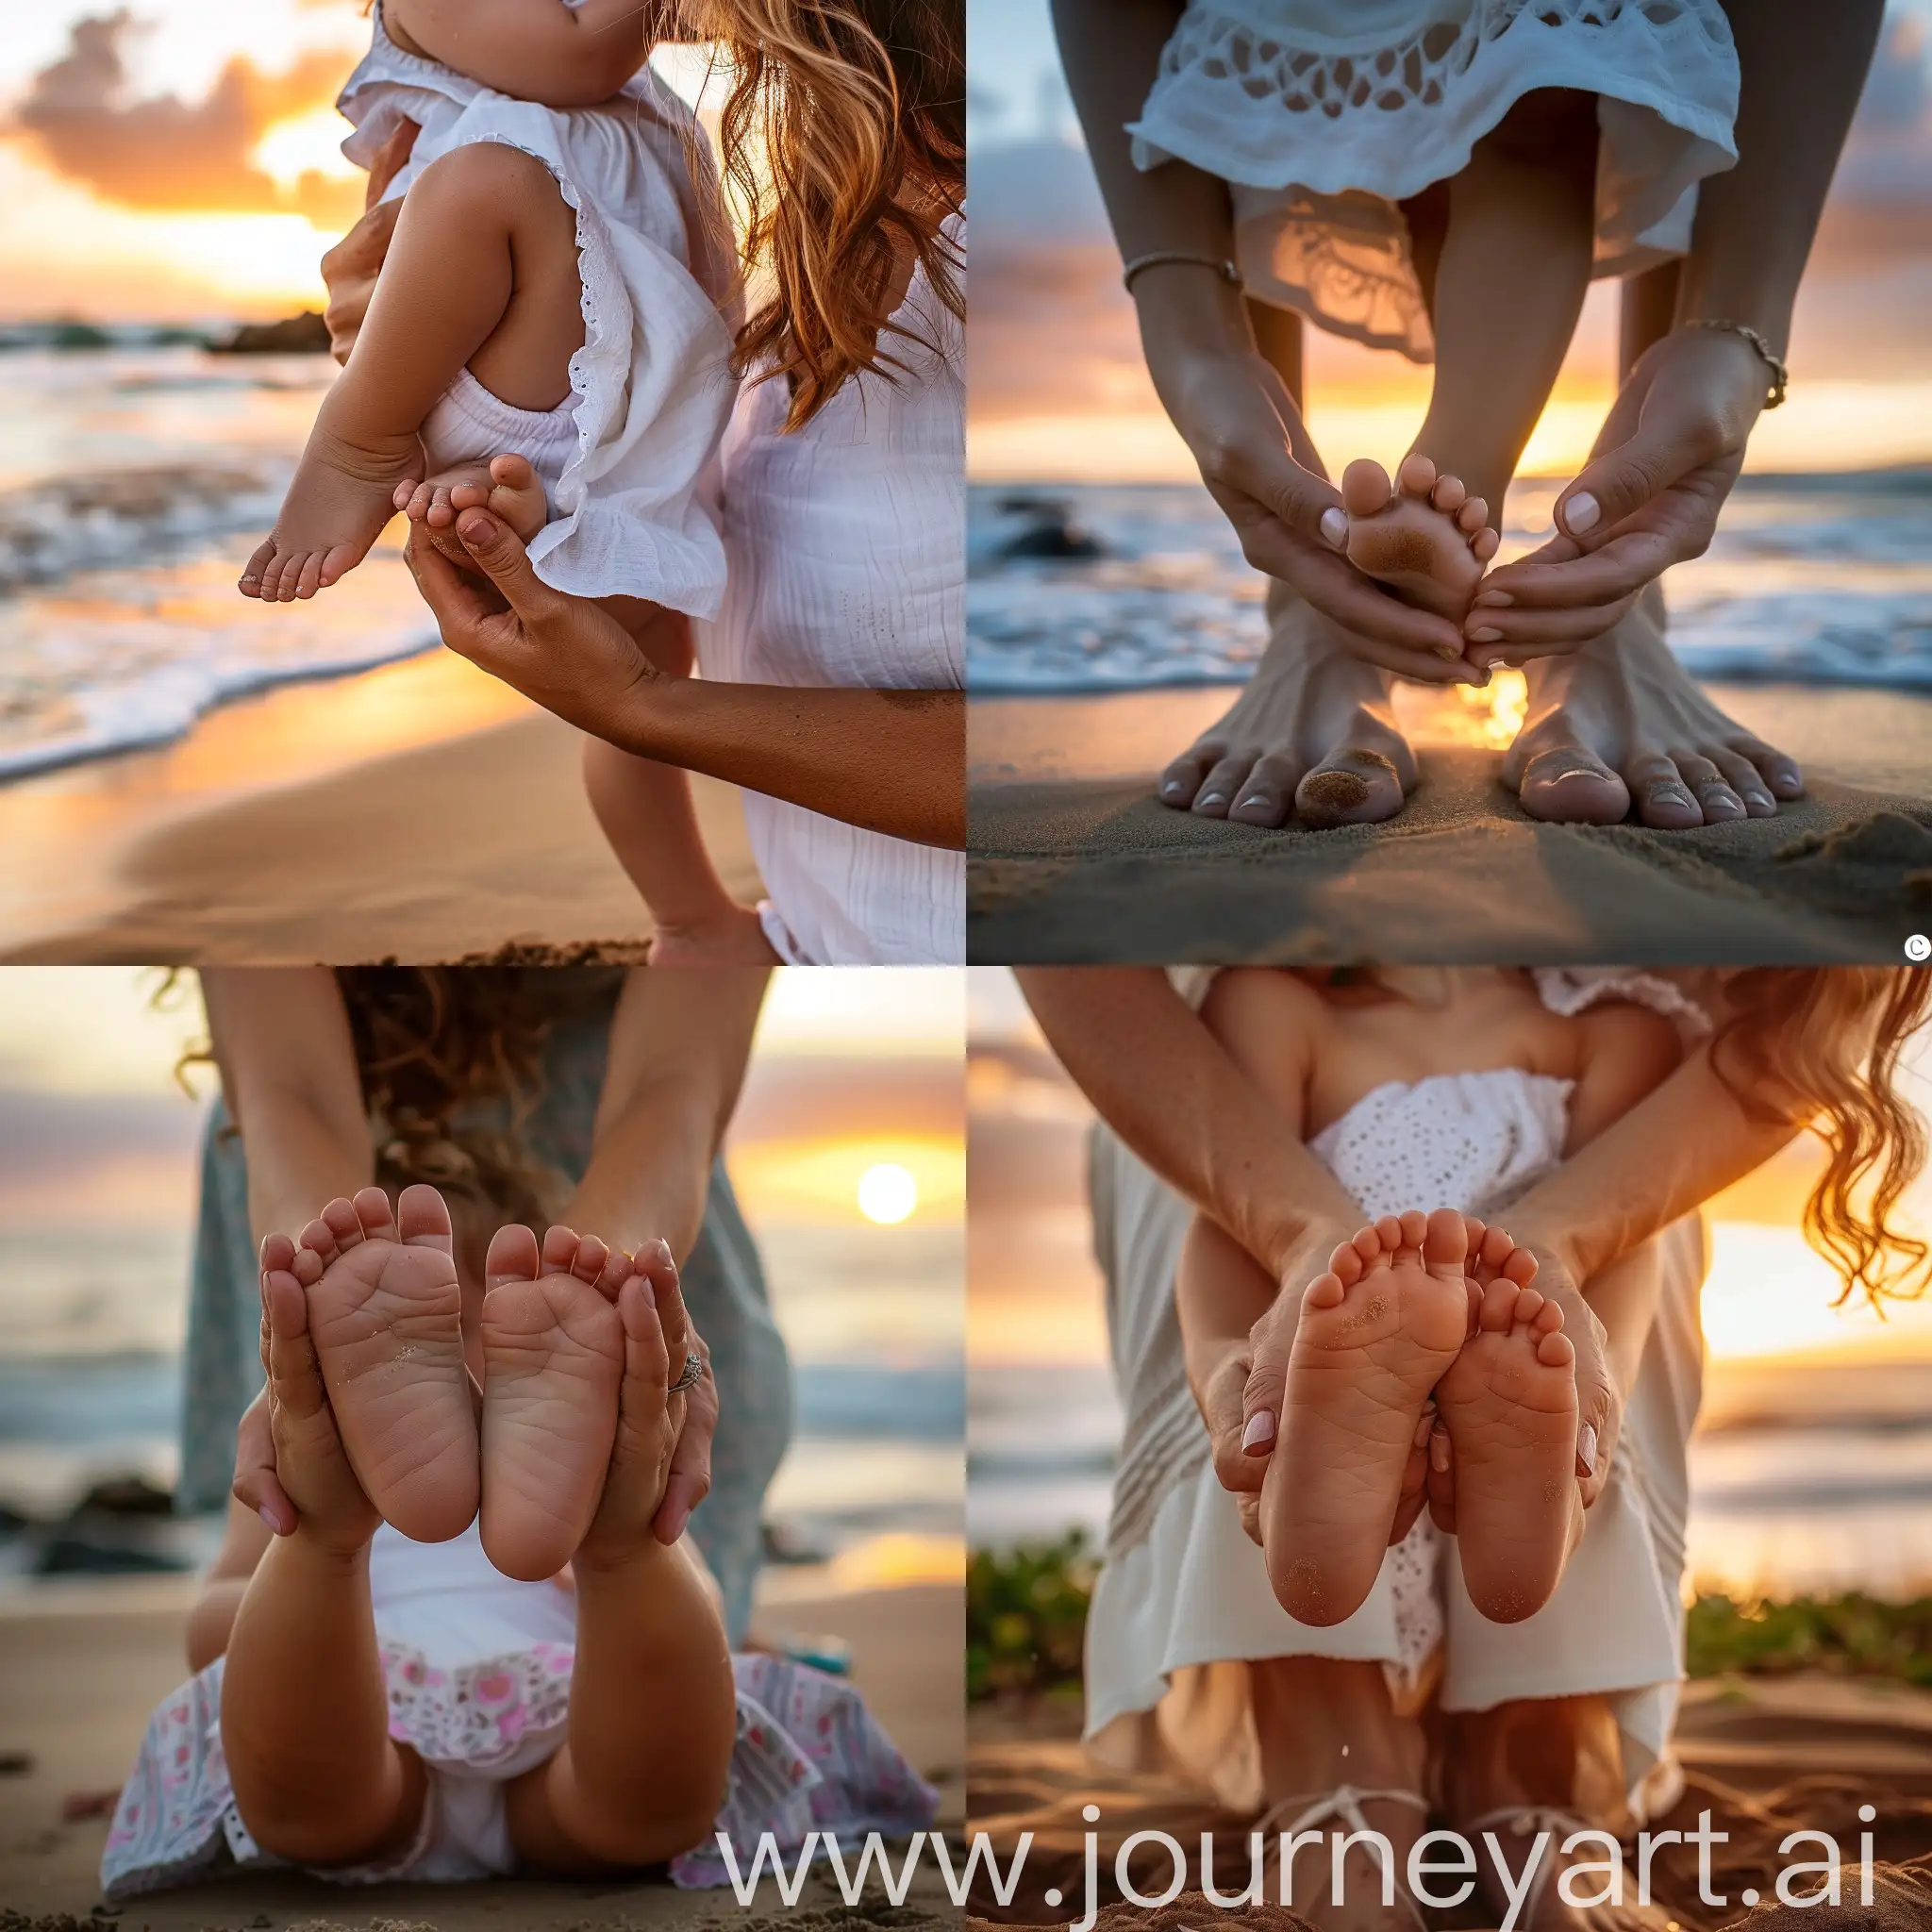 Mothers-Sunset-Kiss-A-Heartwarming-Moment-at-the-Beach